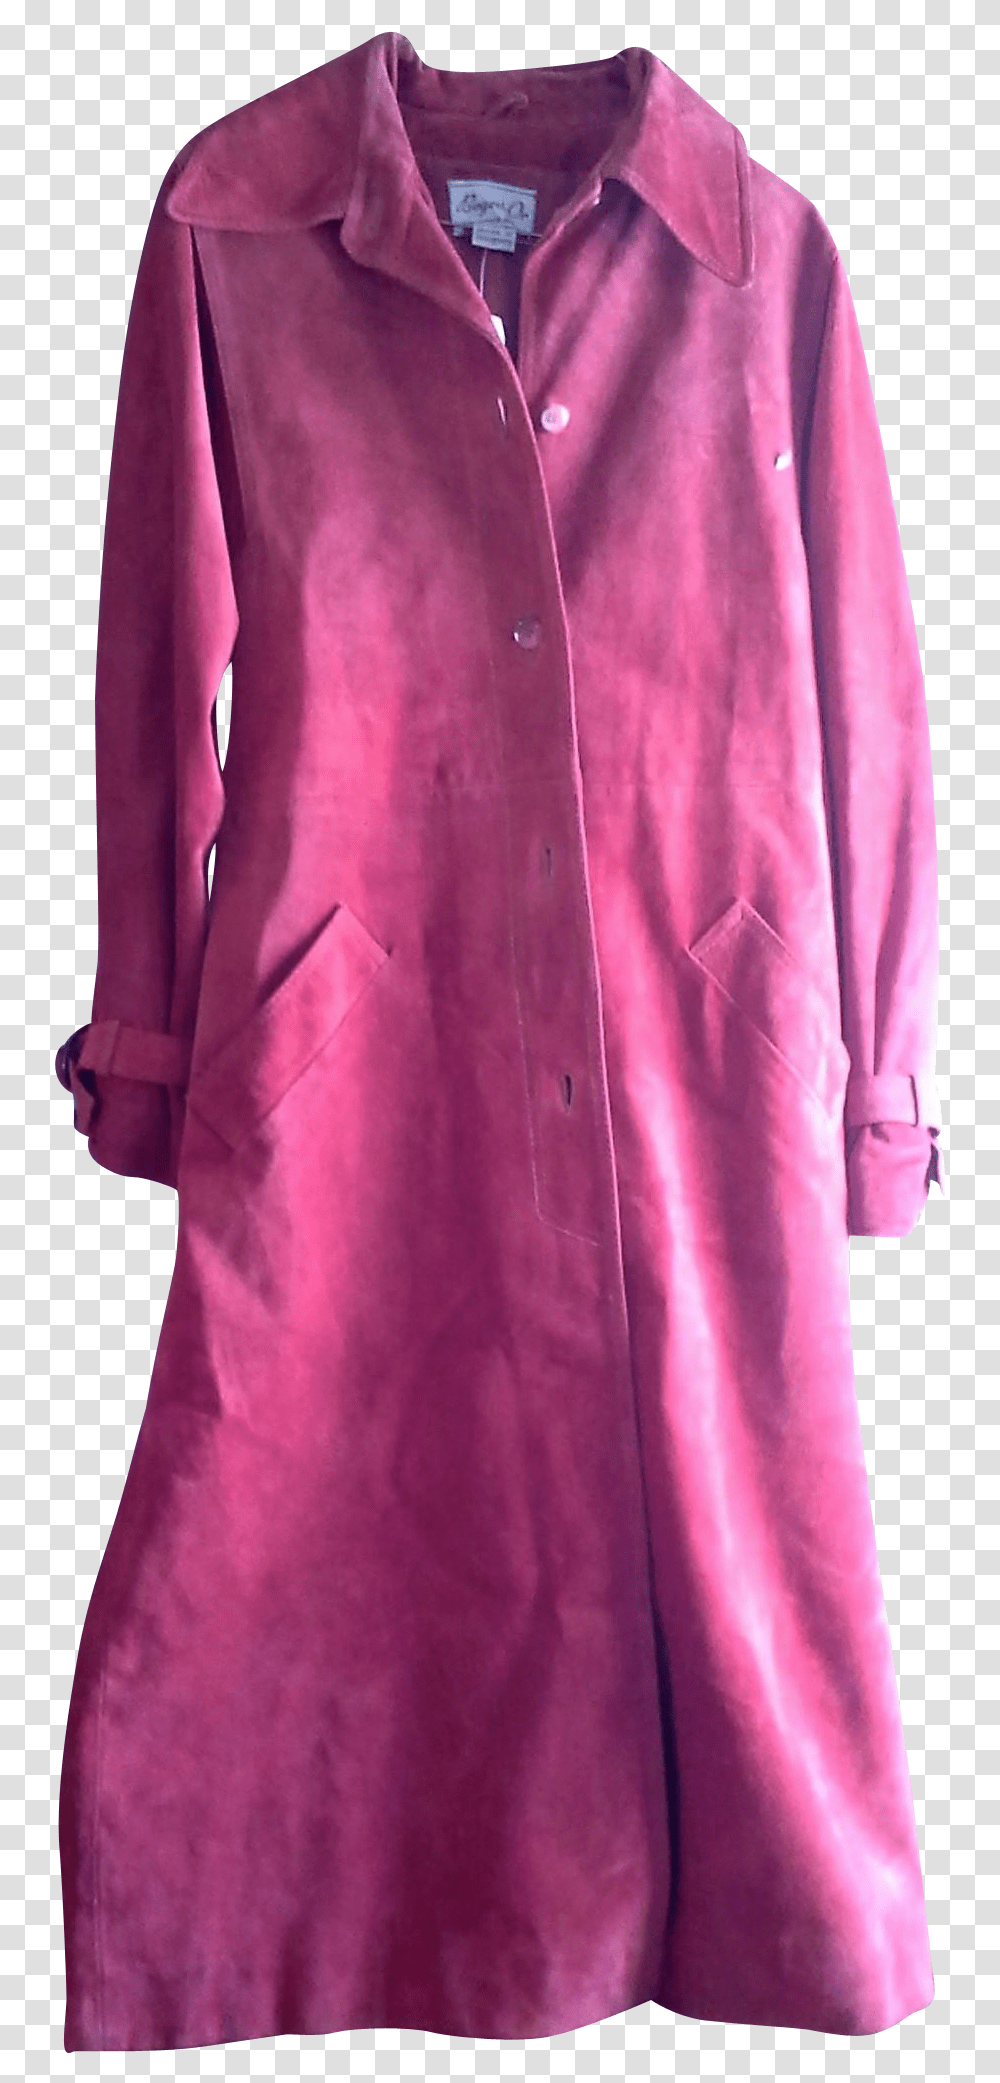 Beged Or Suede Leather Rust Orange Ladies Trench Coat, Apparel, Sleeve, Purple Transparent Png